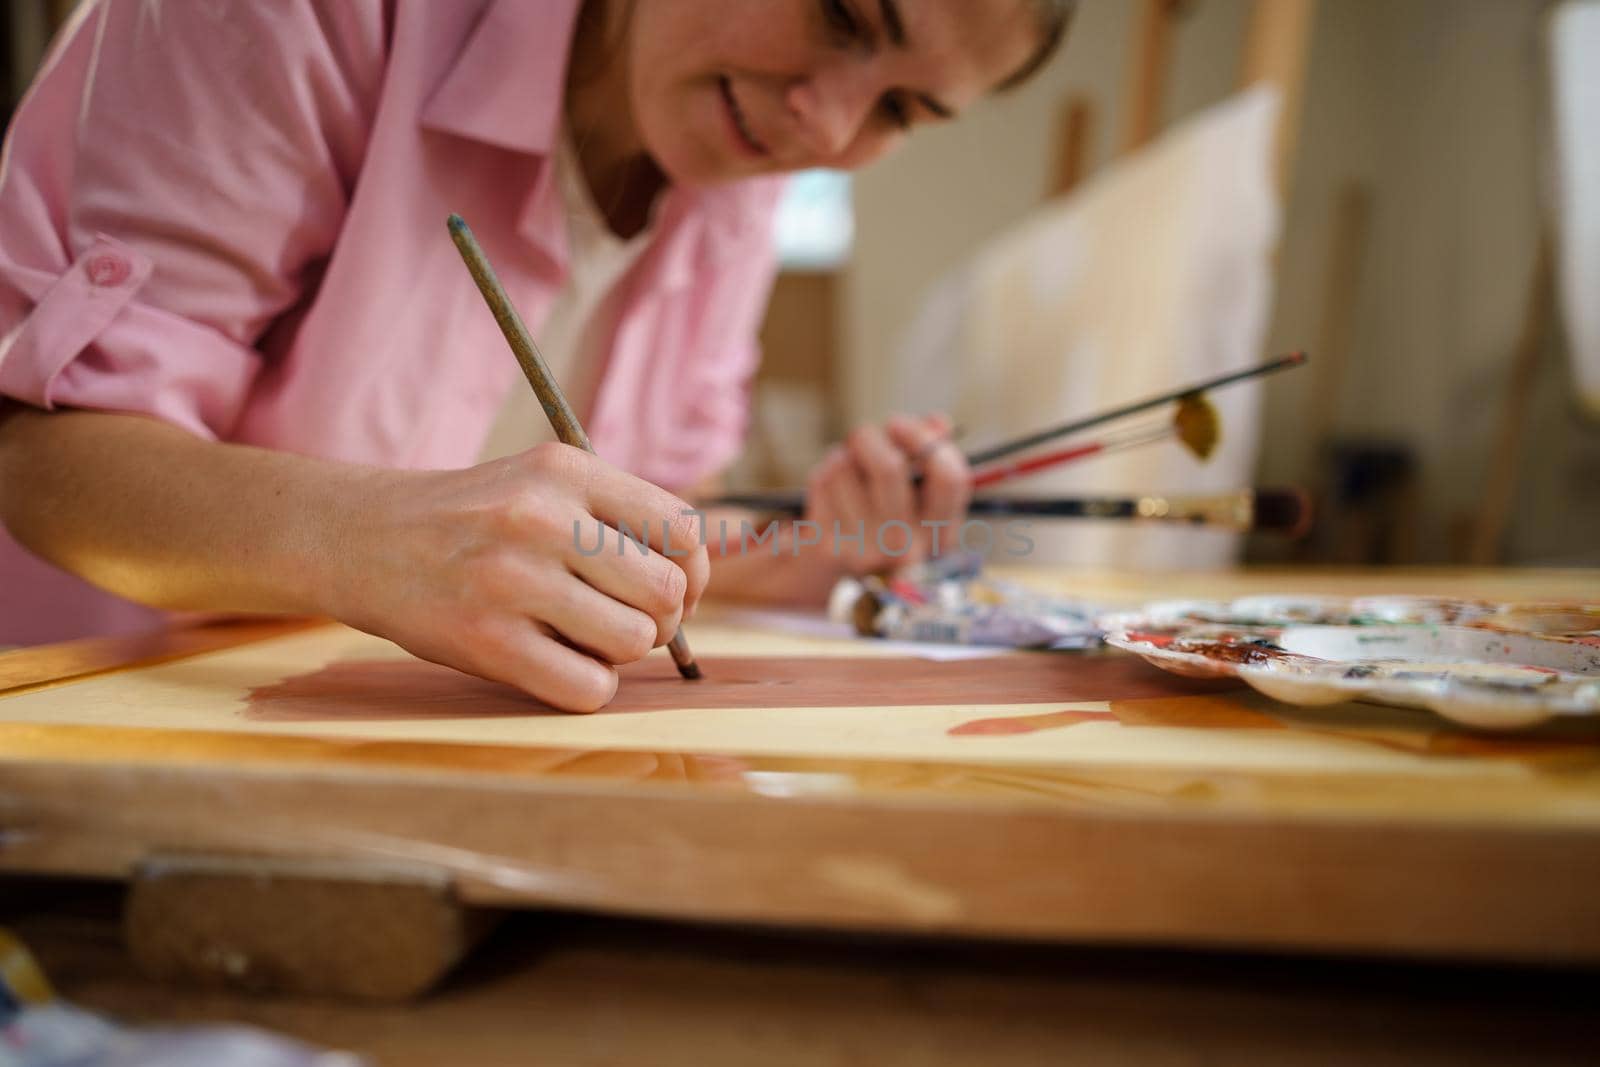 Female artist working in studio. Creative workspace, painting class, easel with canvas, art therapy. Inspiration, creativity, talent, craft concept. Artist studio interior. People, leisure and hobby.